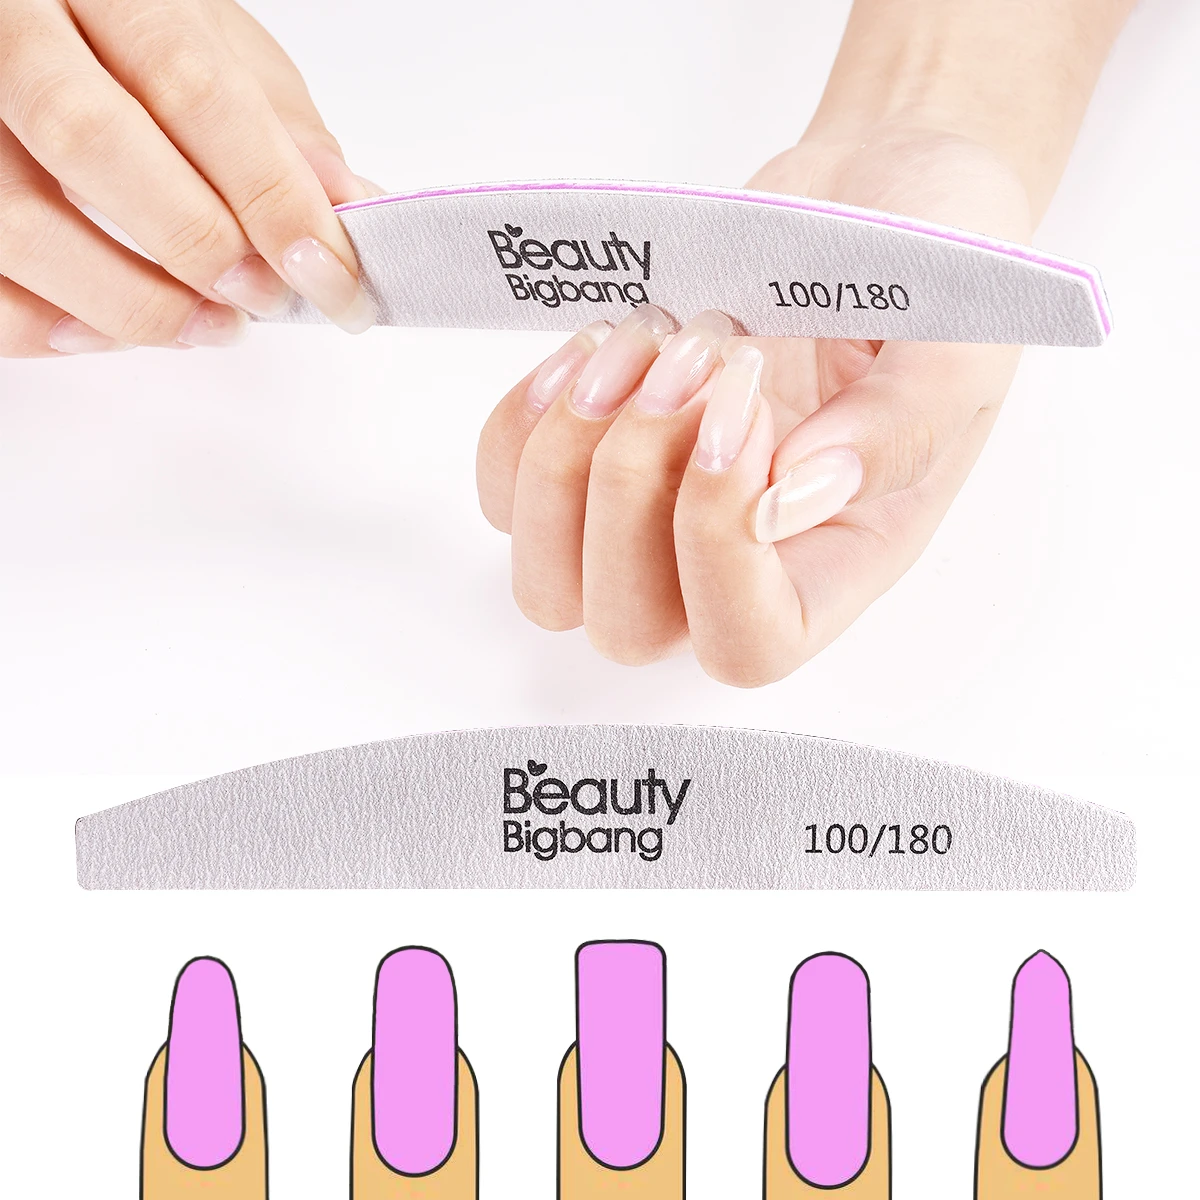 

BEAUTYBIGBANG 1Pc Nail File 100/180 Sanding Buffer Block Pedicure Manicure Buffing Tools Accessories Double Side Files